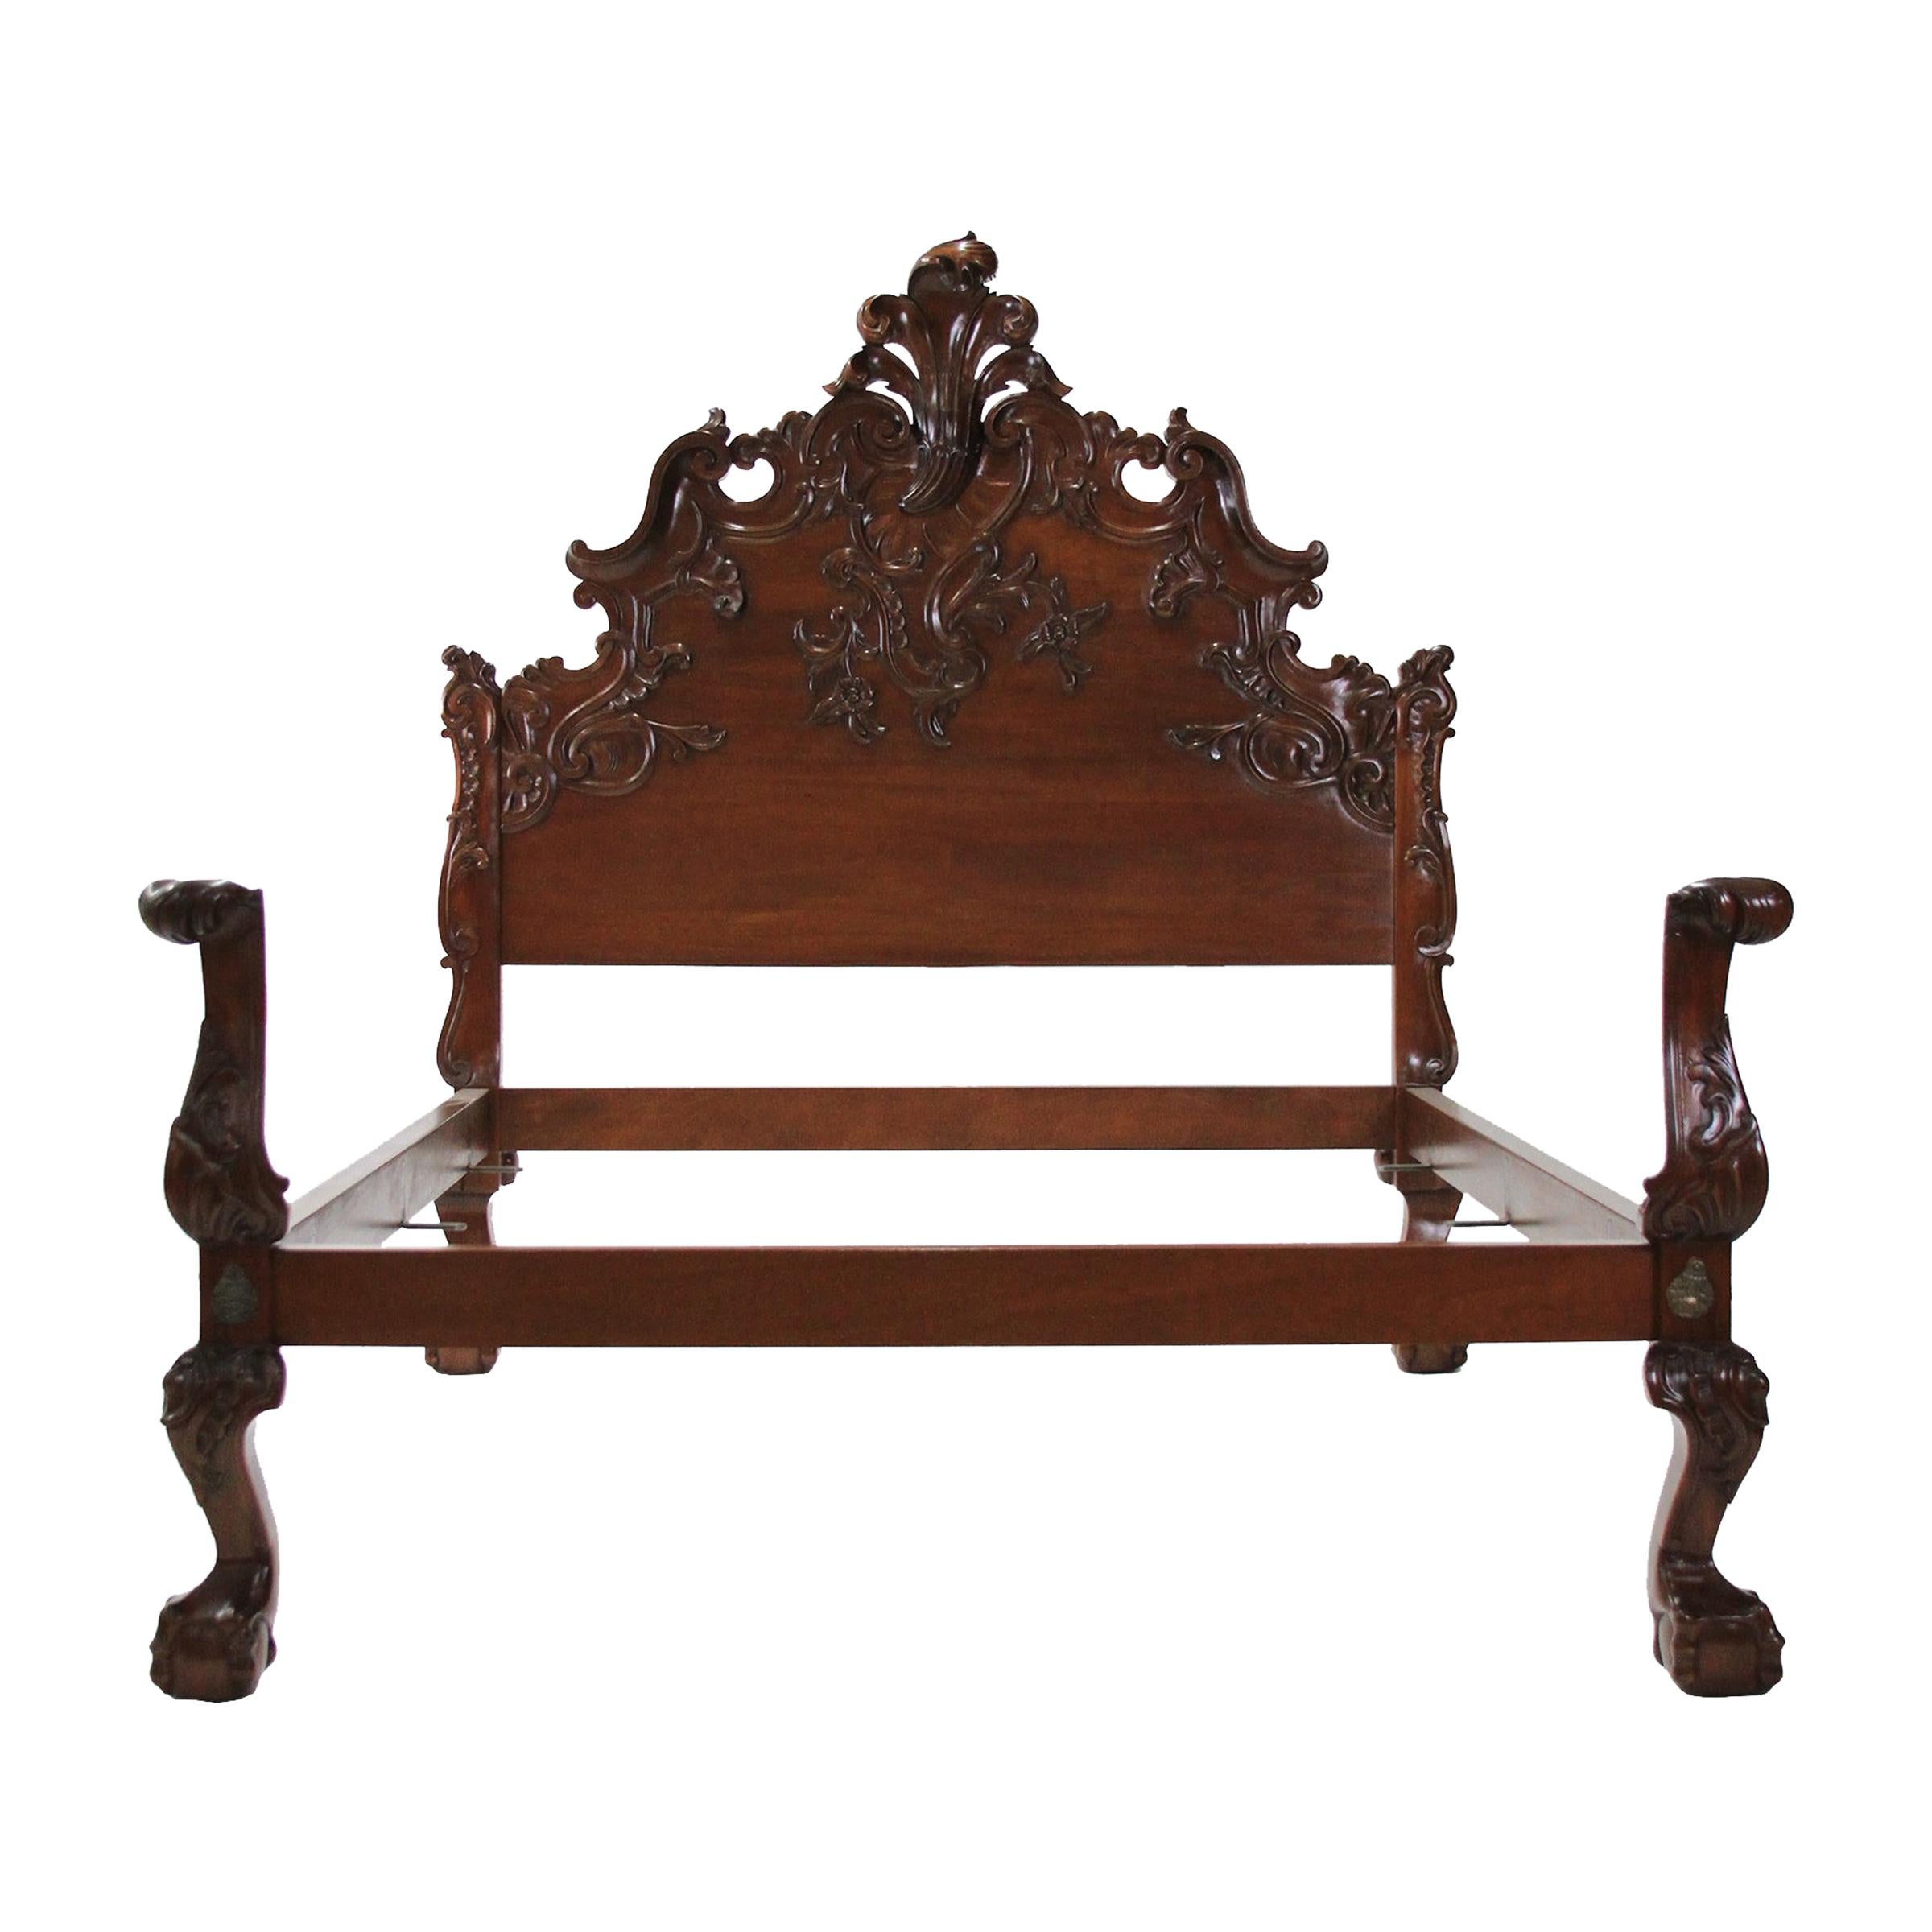 King Solid Mahogany Hand Carved Spanish Rococo Style Bed with Ball & Claw Foot